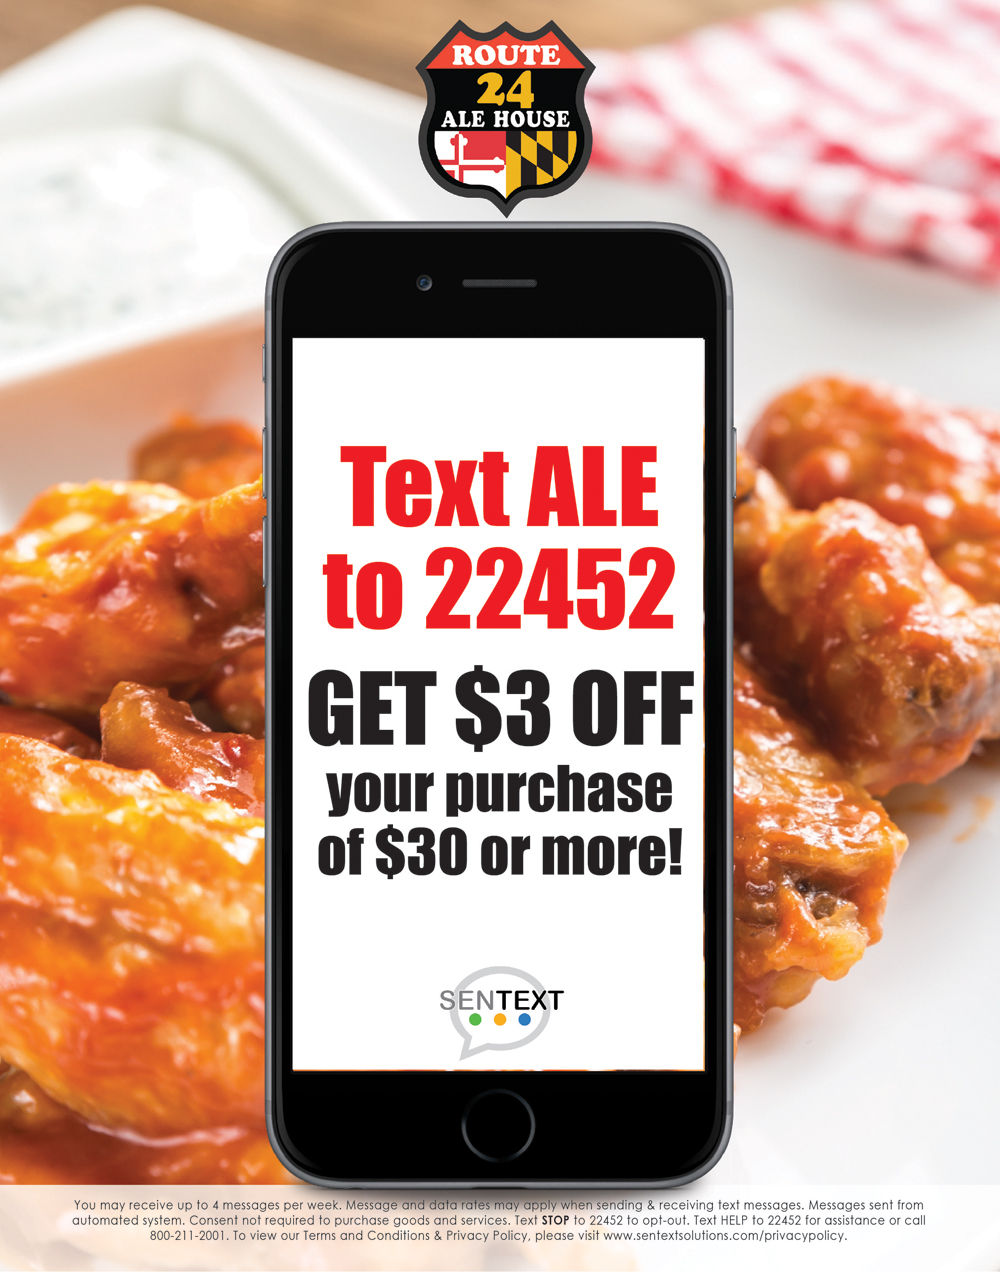 Text ALE to 22452 GET $3 OFF your purchase of $30 or more!